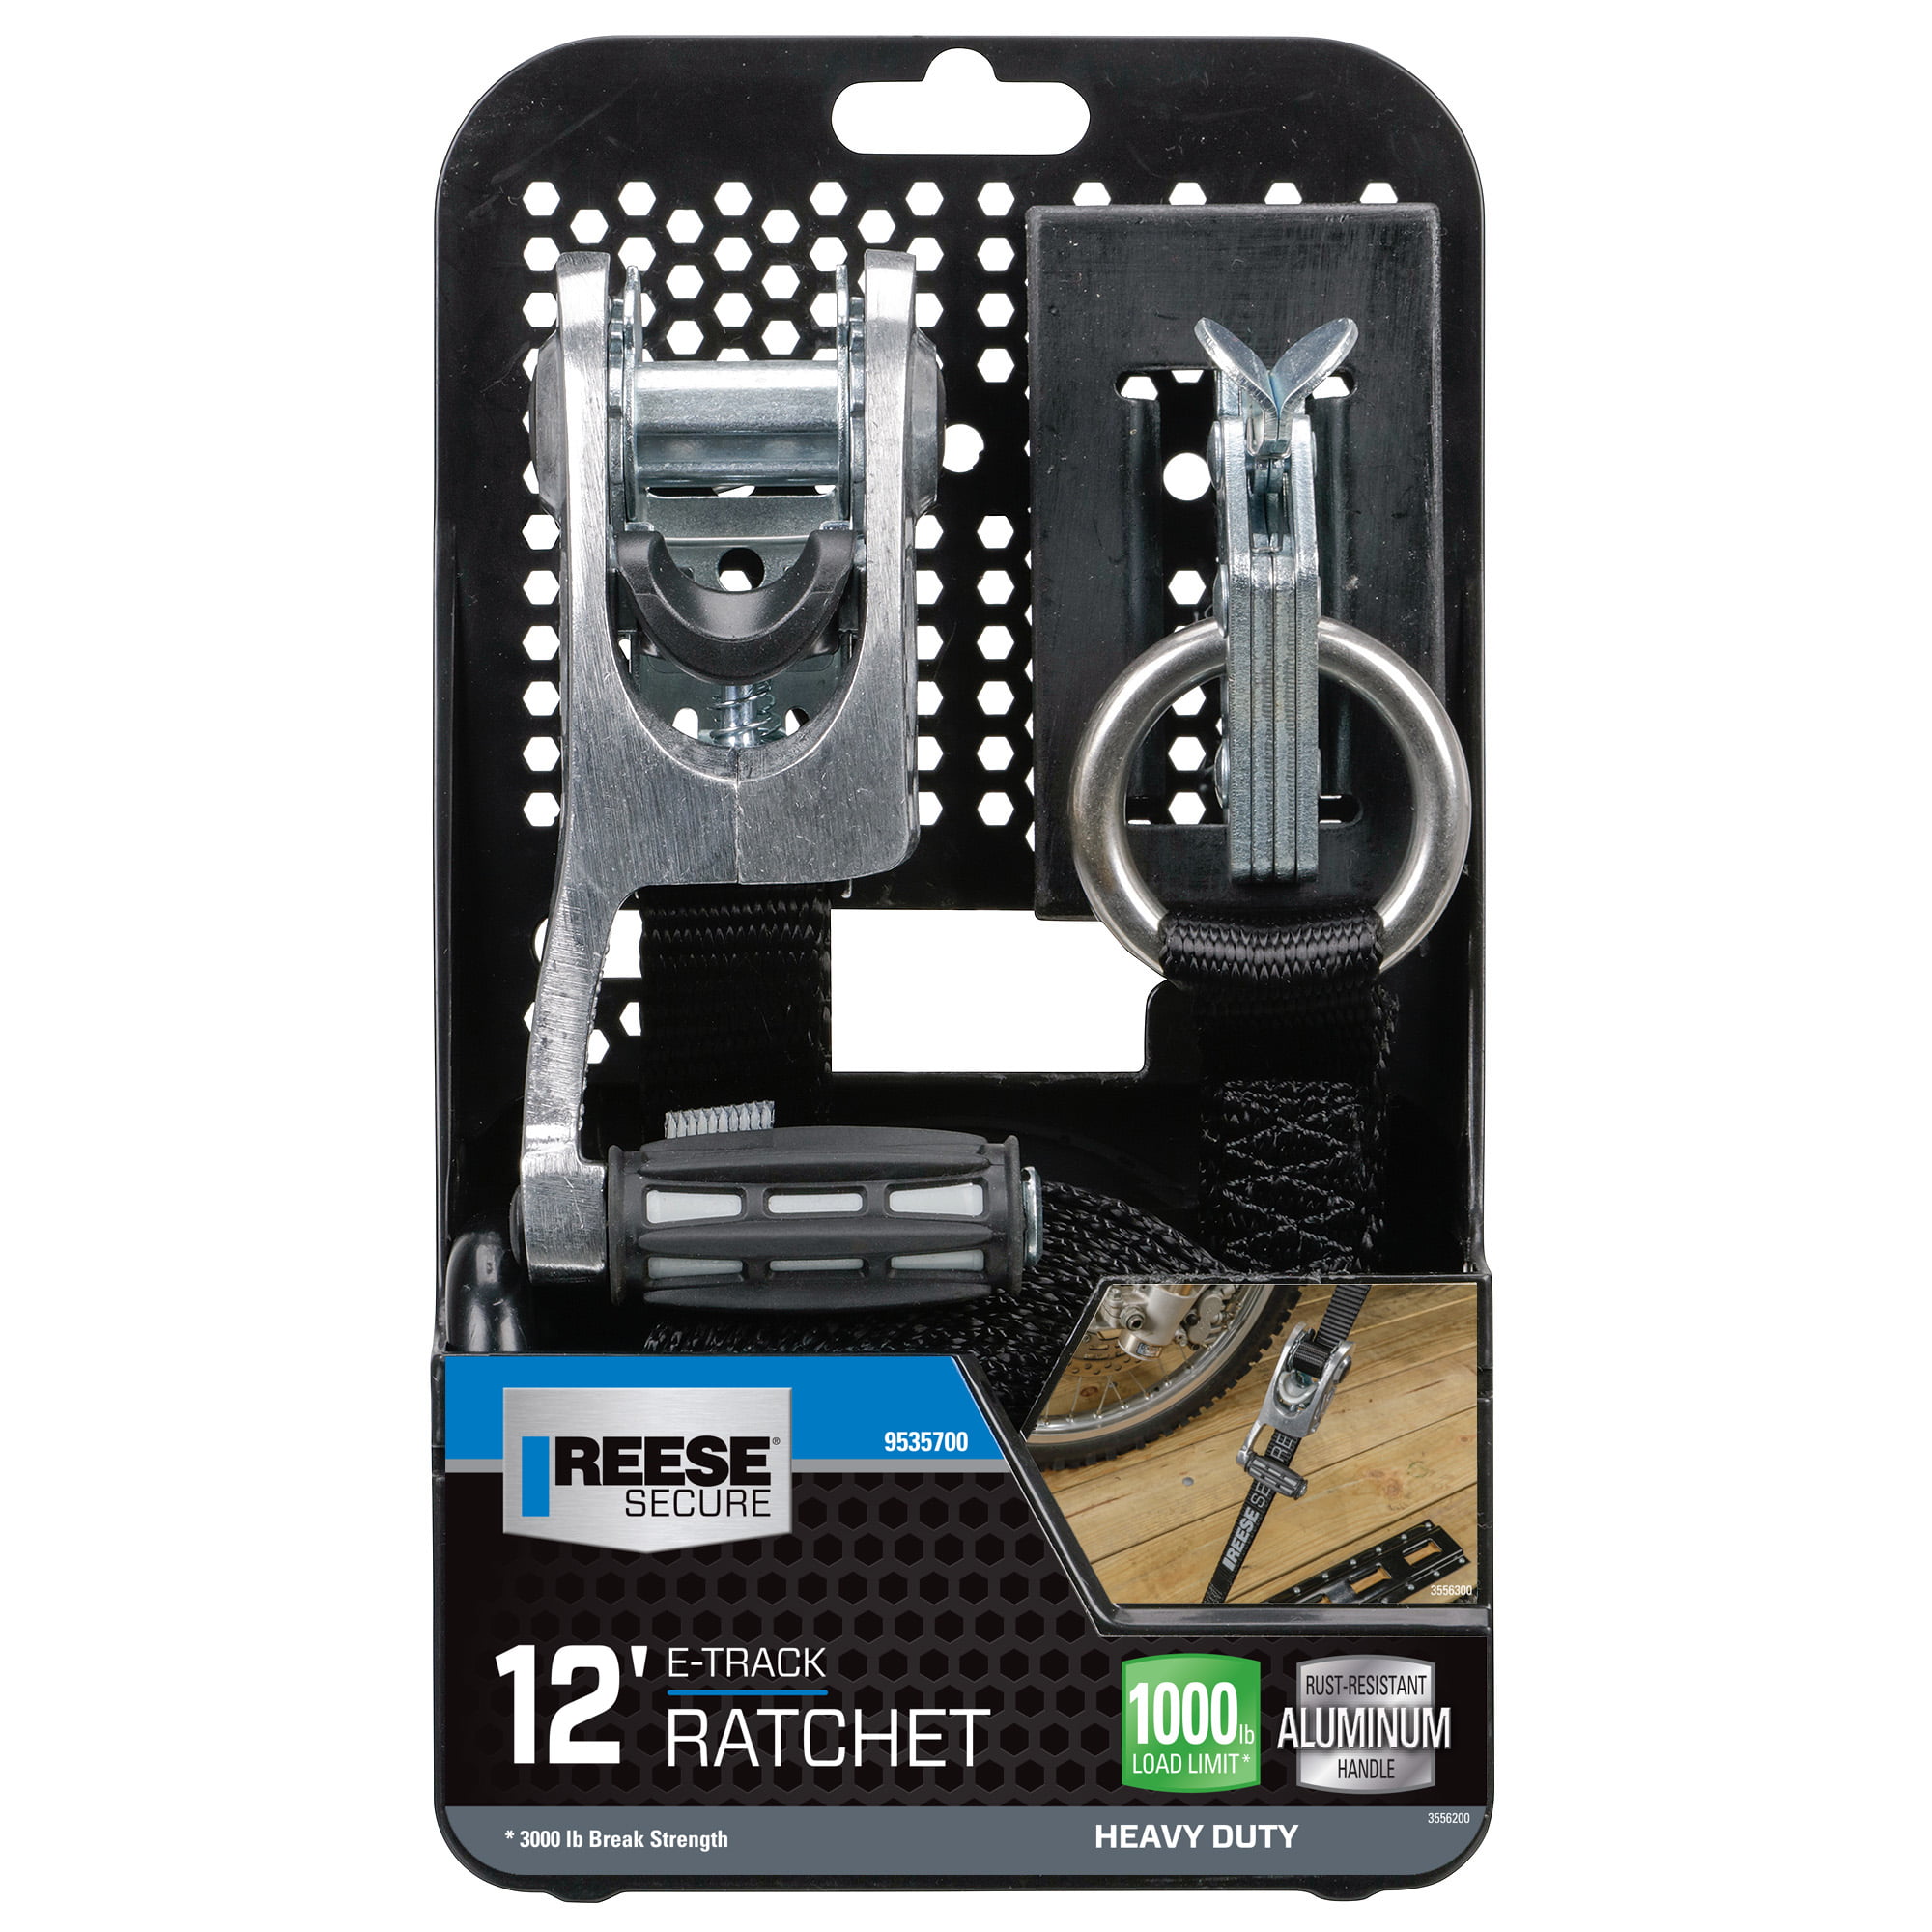 Reese Secure 9547300 10' Standard Duty Truck Bed Ratchet 2-Pack 